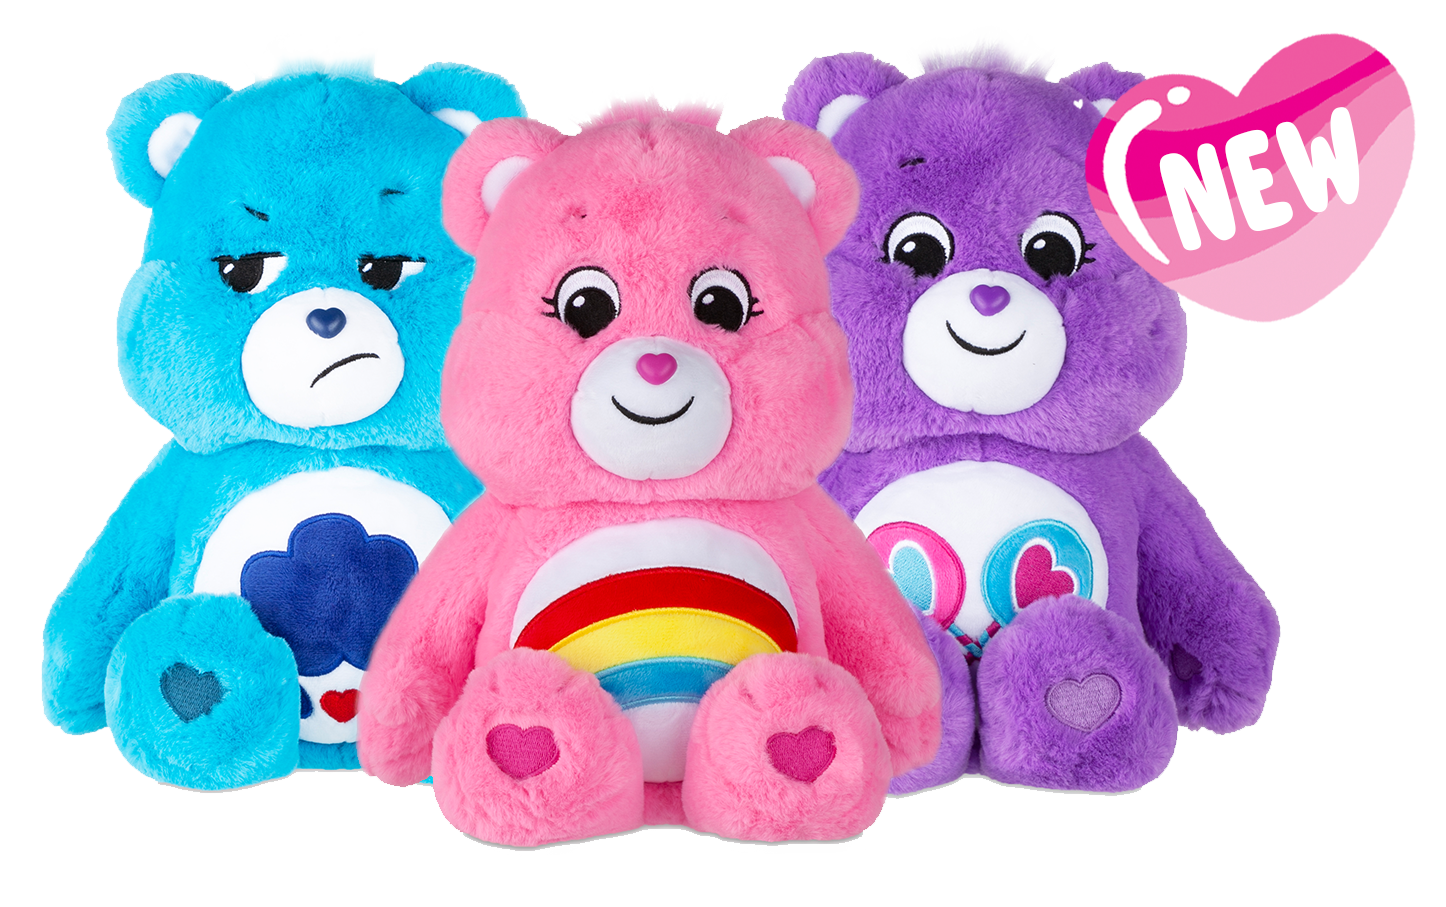 The Care Bears - wide 8